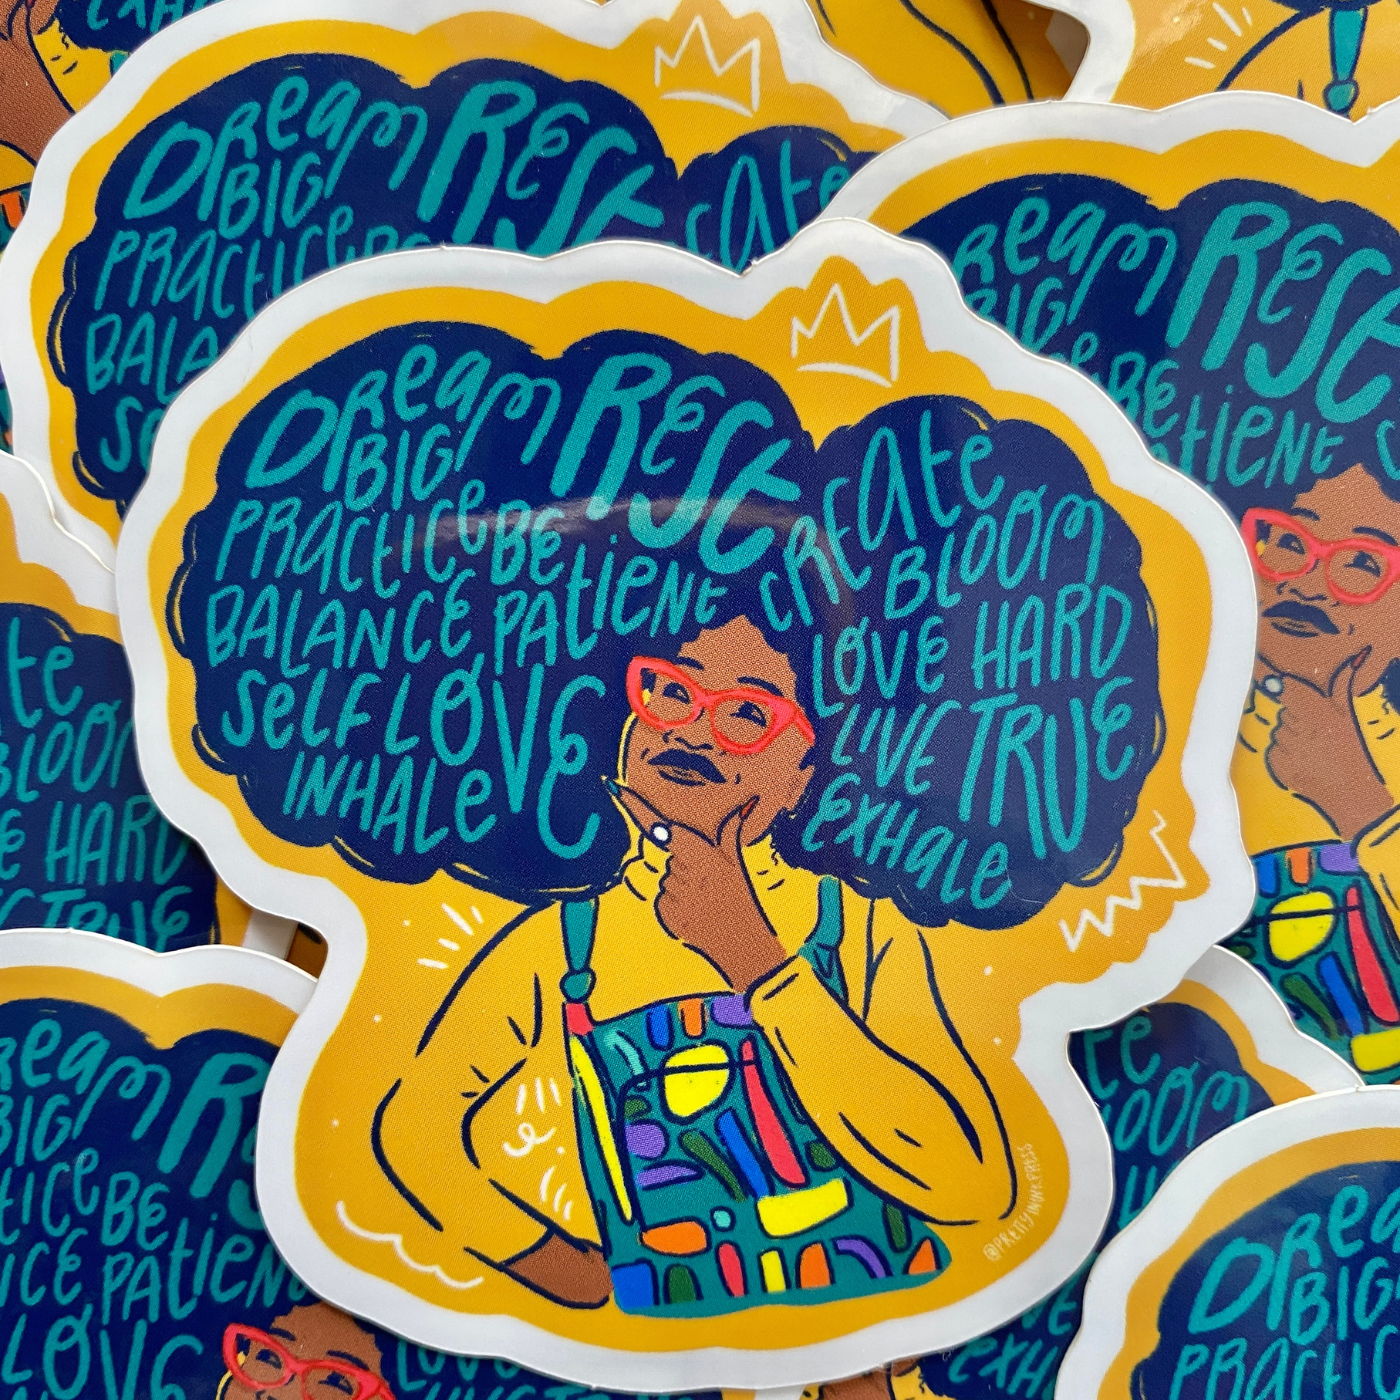 A stack of stickers of a person with their left hand to their chin and their right hand to their hip. A word cloud shows words like dream, big, practice, self love, inhale and more in light blue in the person's large navy blue hair.